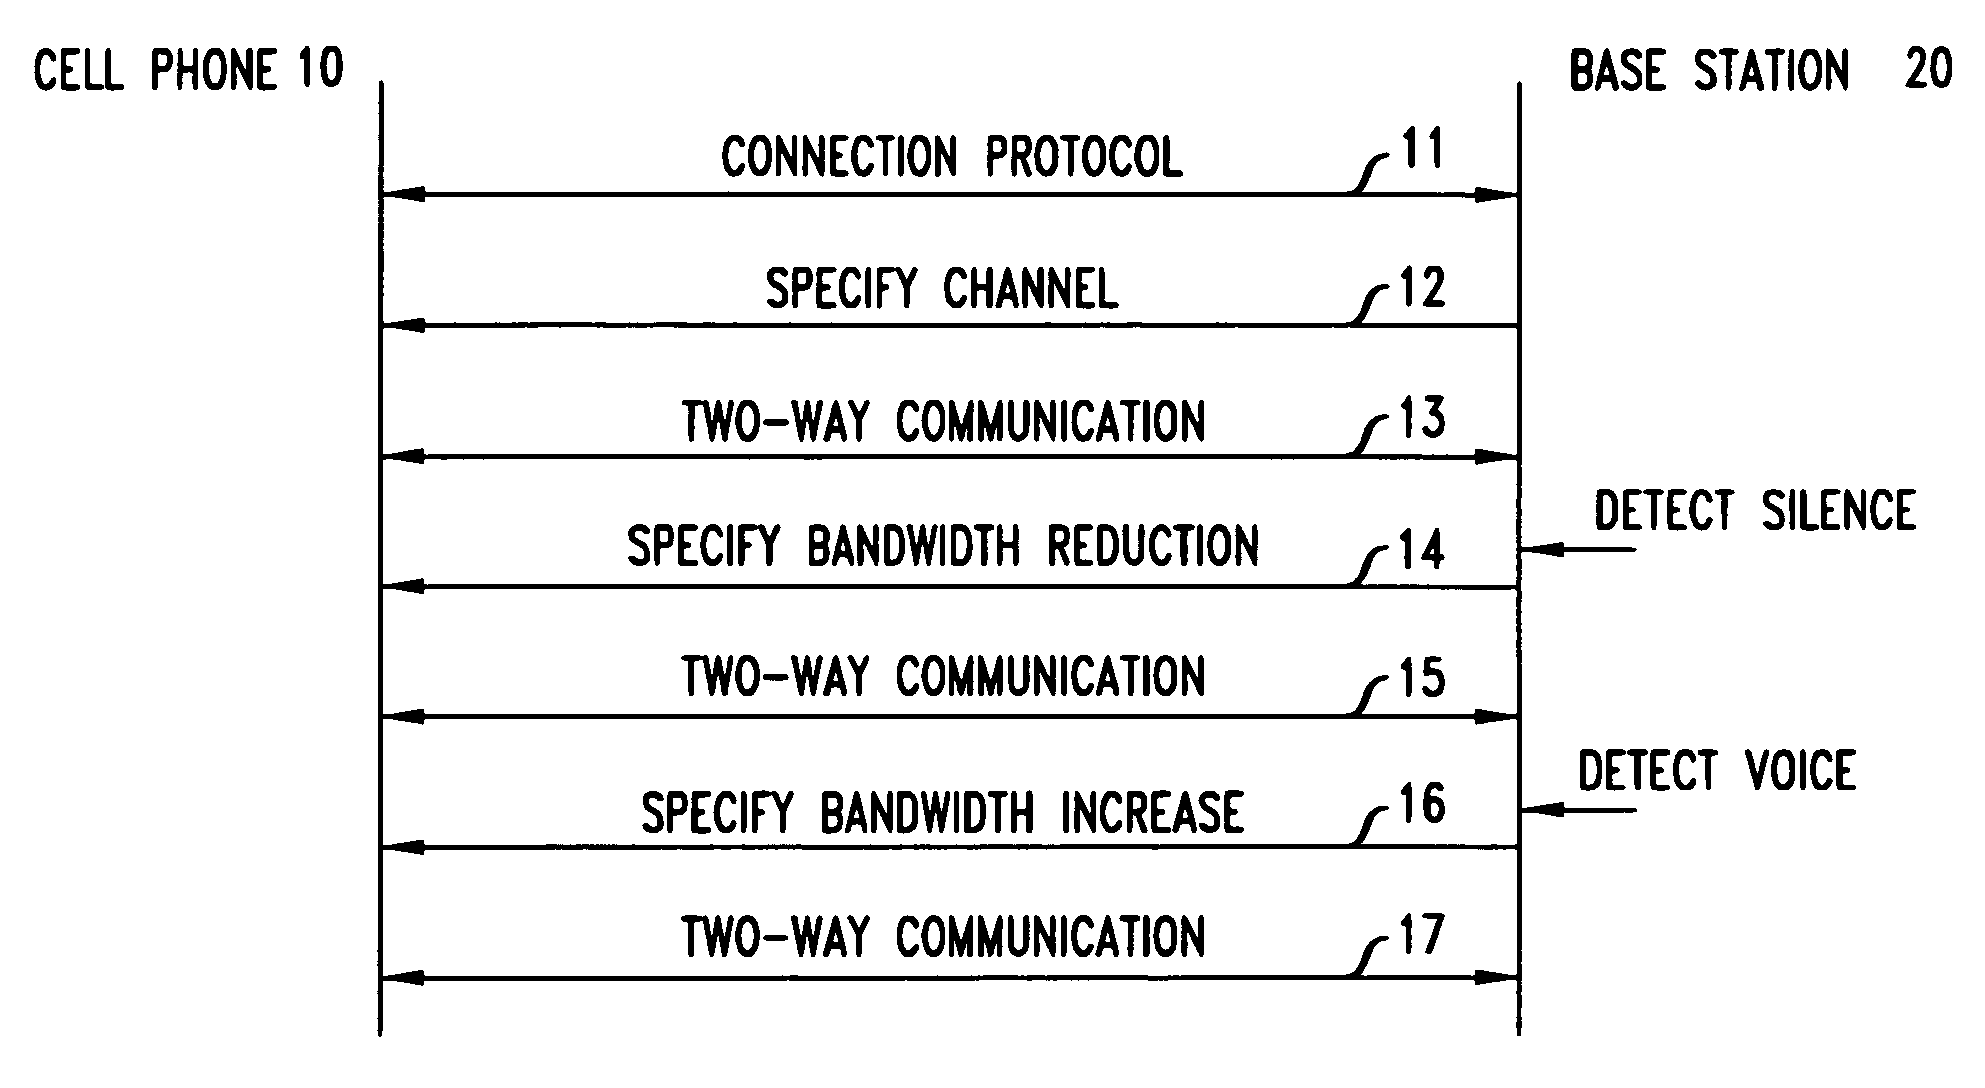 Multiple-access scheme for packet voice that uses voice activity detection